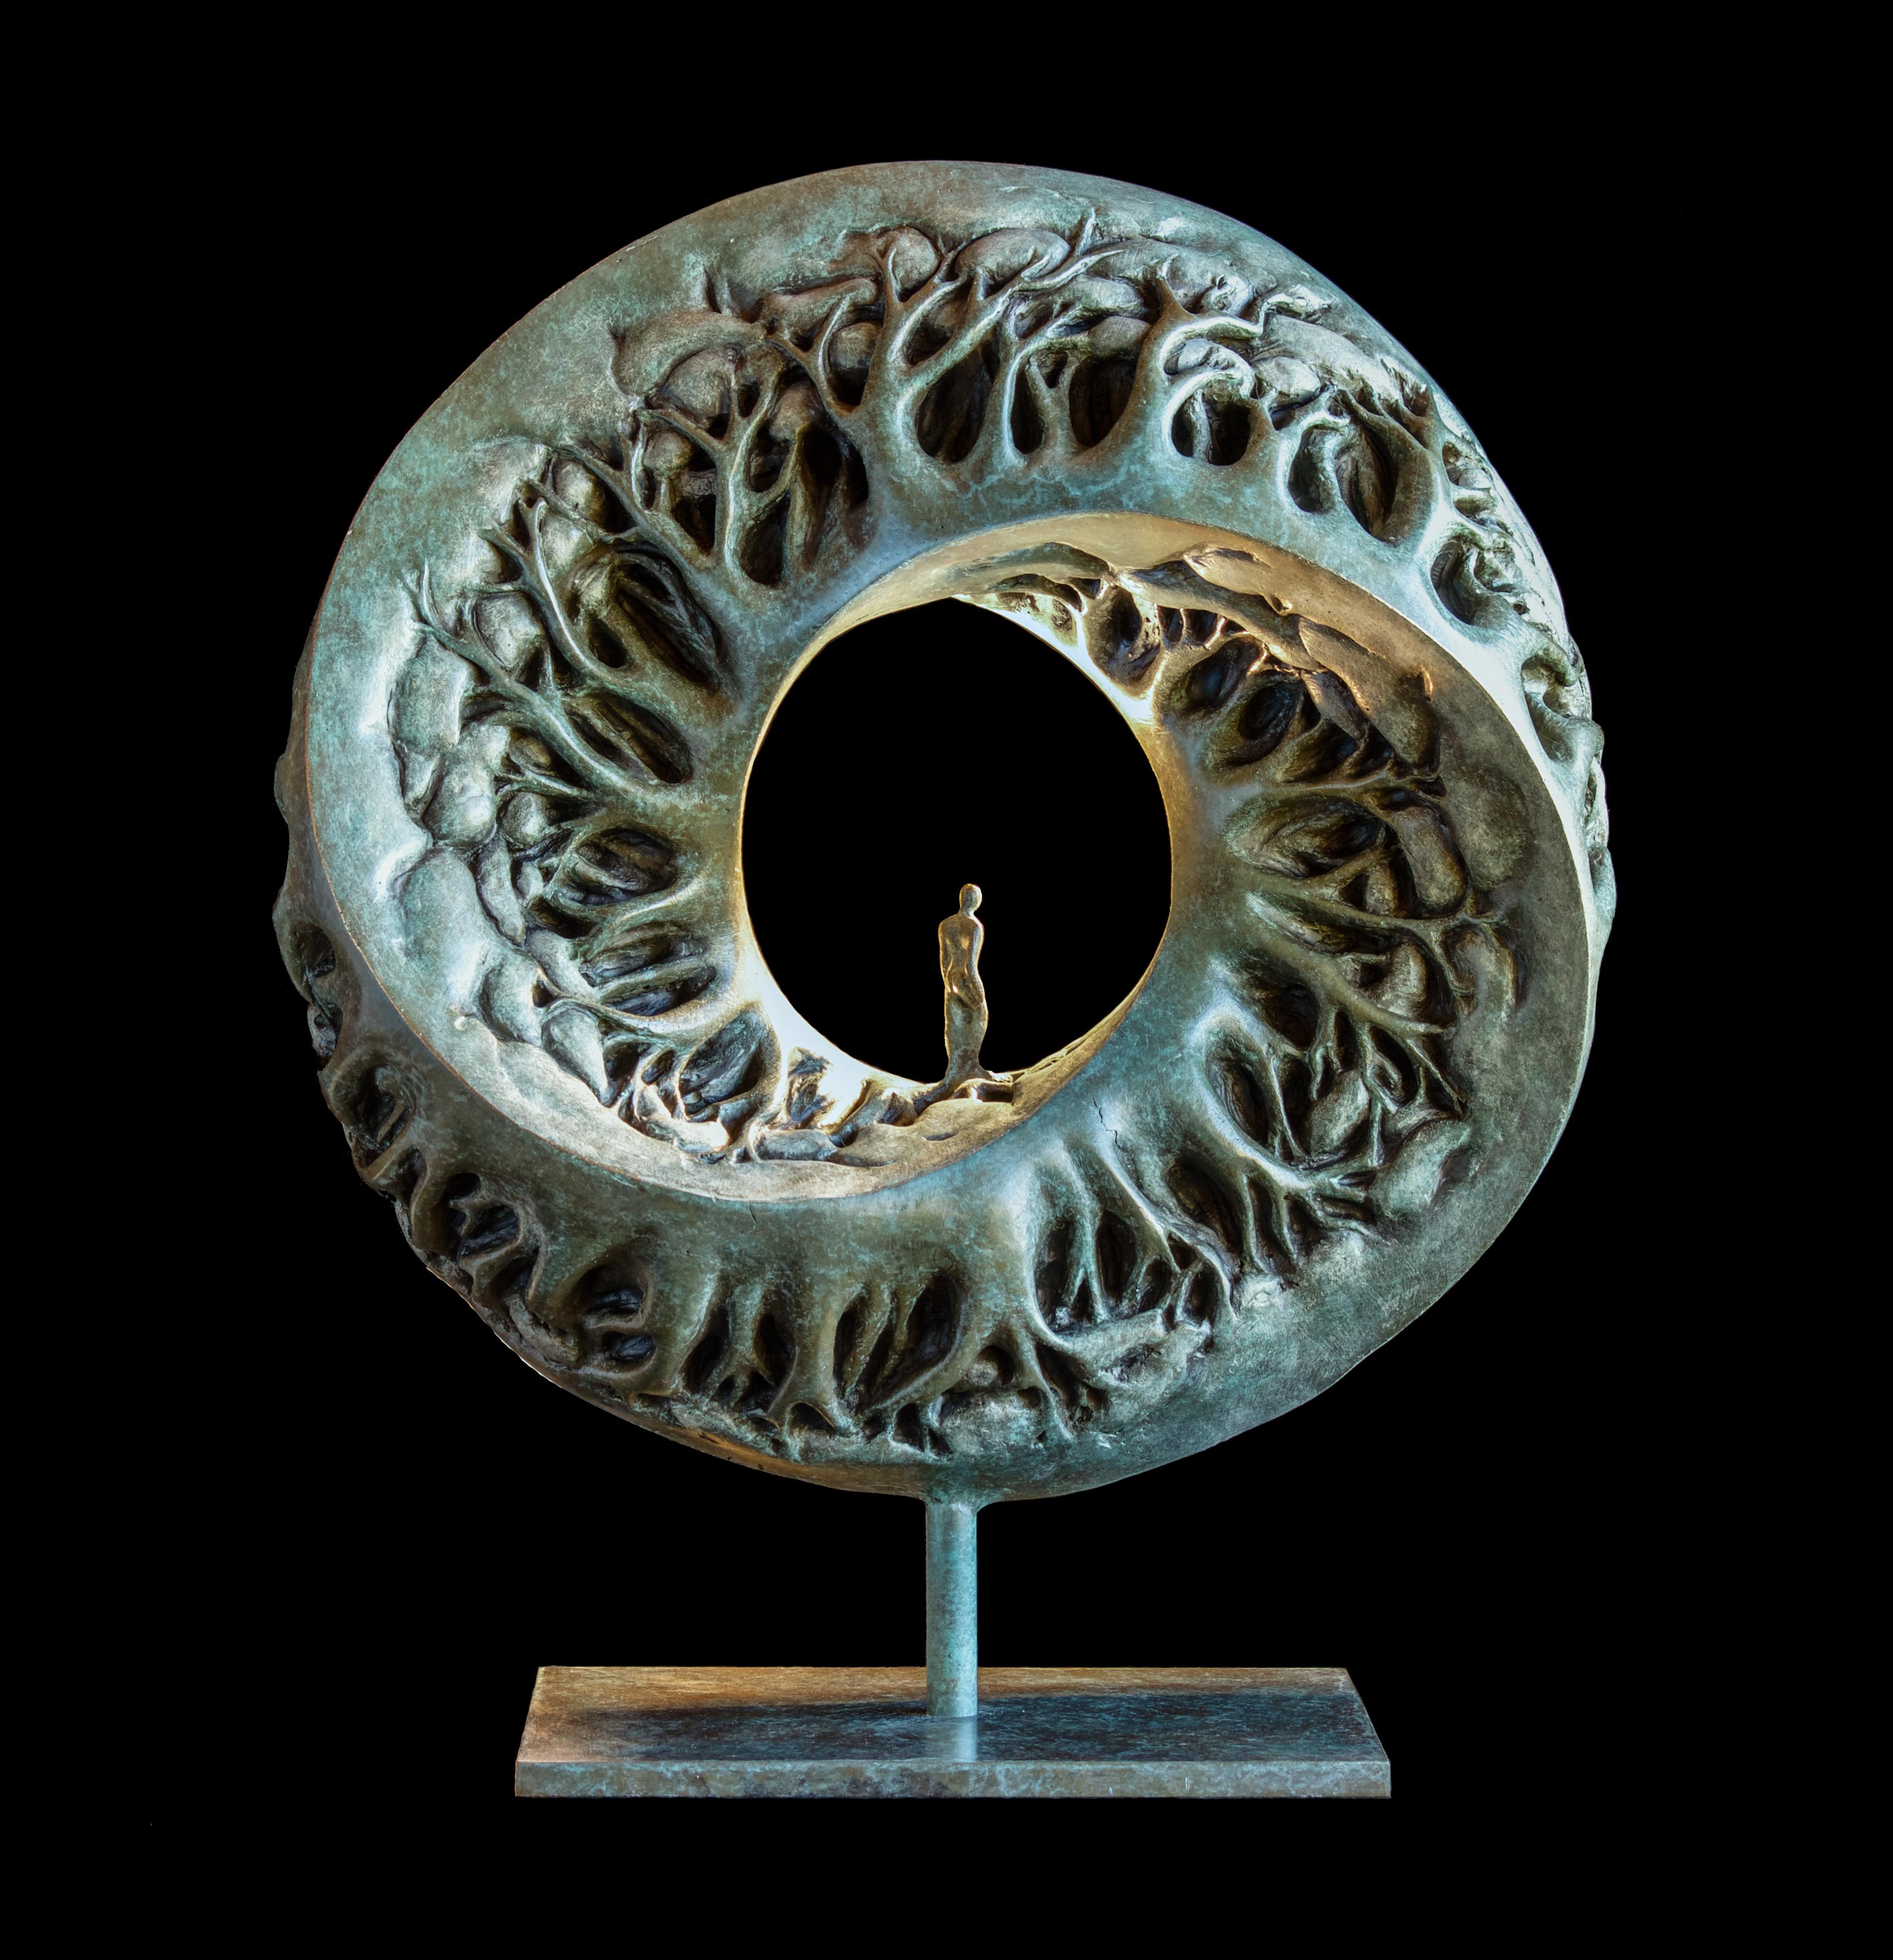 Isabelle Jeandot Still-Life Sculpture - "Through the Looking Glass", Man Walking on Forest Mobius Band Bronze Sculpture